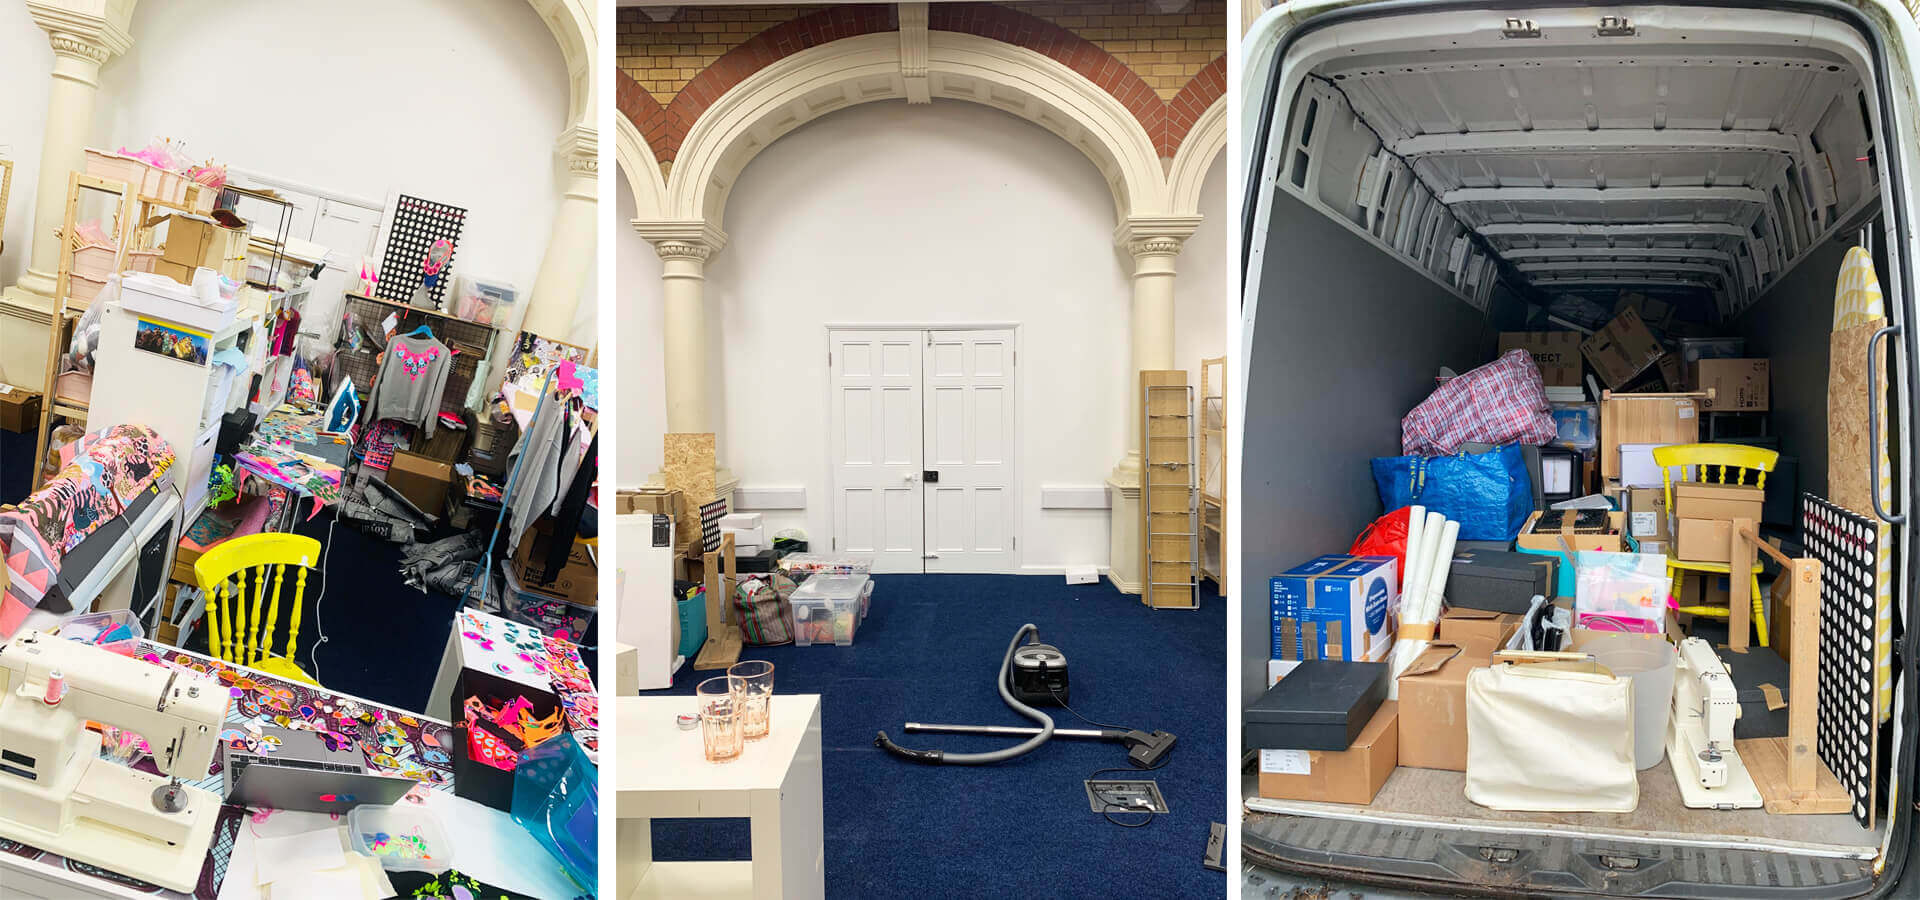 Three images. The first shows a creative studio space including a very cluttered desk and bright yellow chair. The second shows the same space almost empty apart from a hoover and some shelves. The third shows all the items from the first photo, including the yellow chair packed into the back of a removal van.